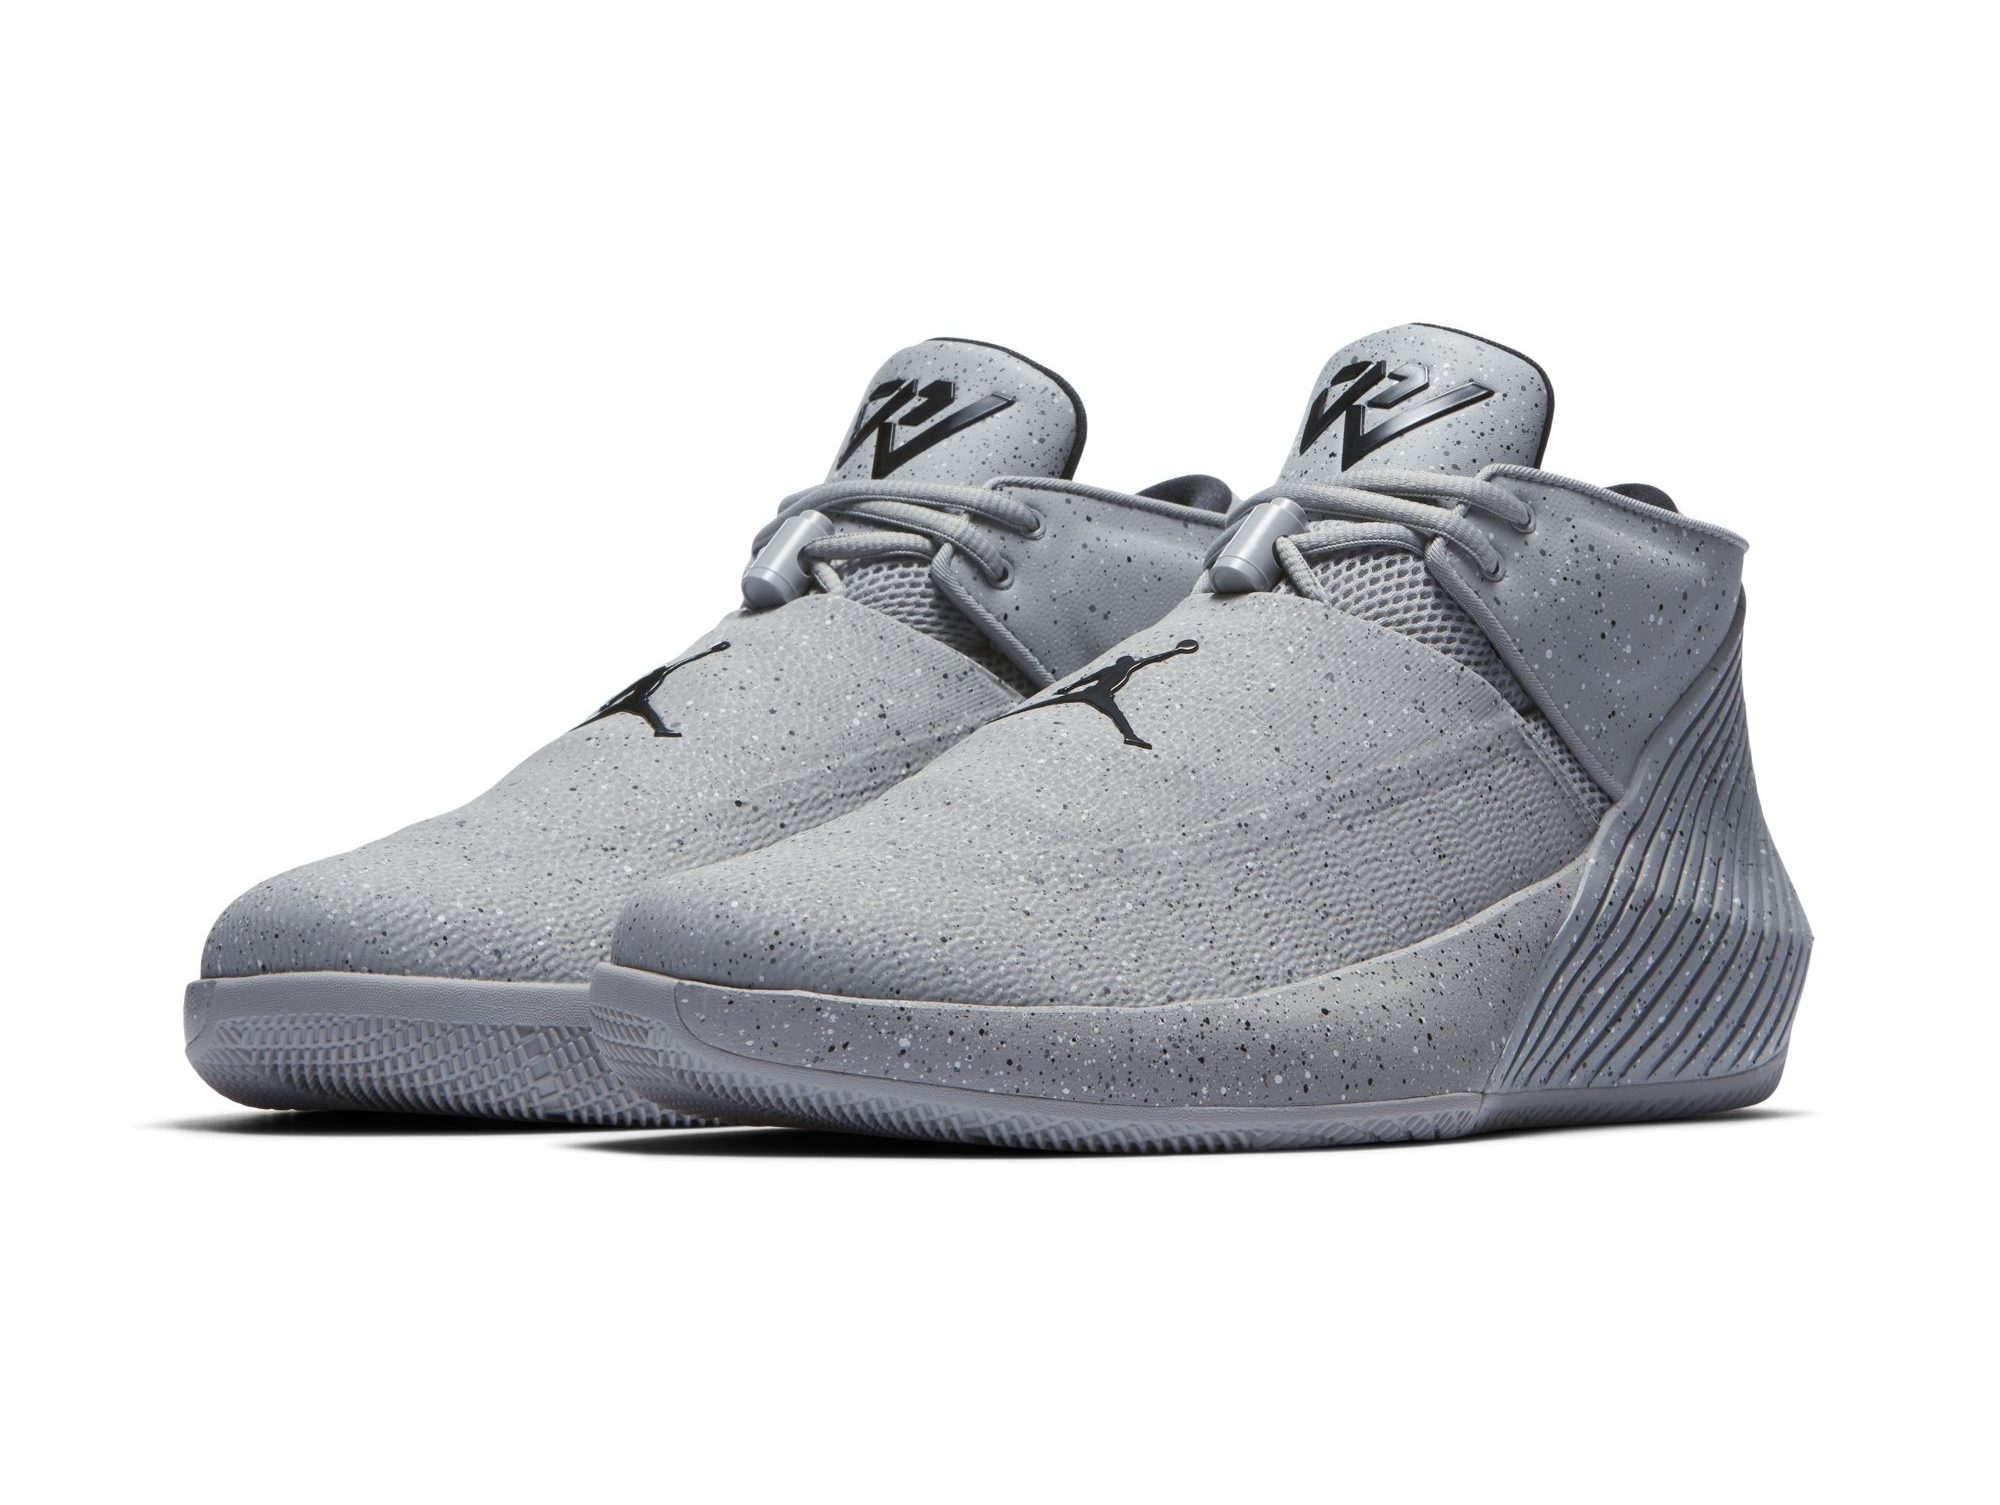 The Jordan Why Not Zer0.1 Low 'Cement 